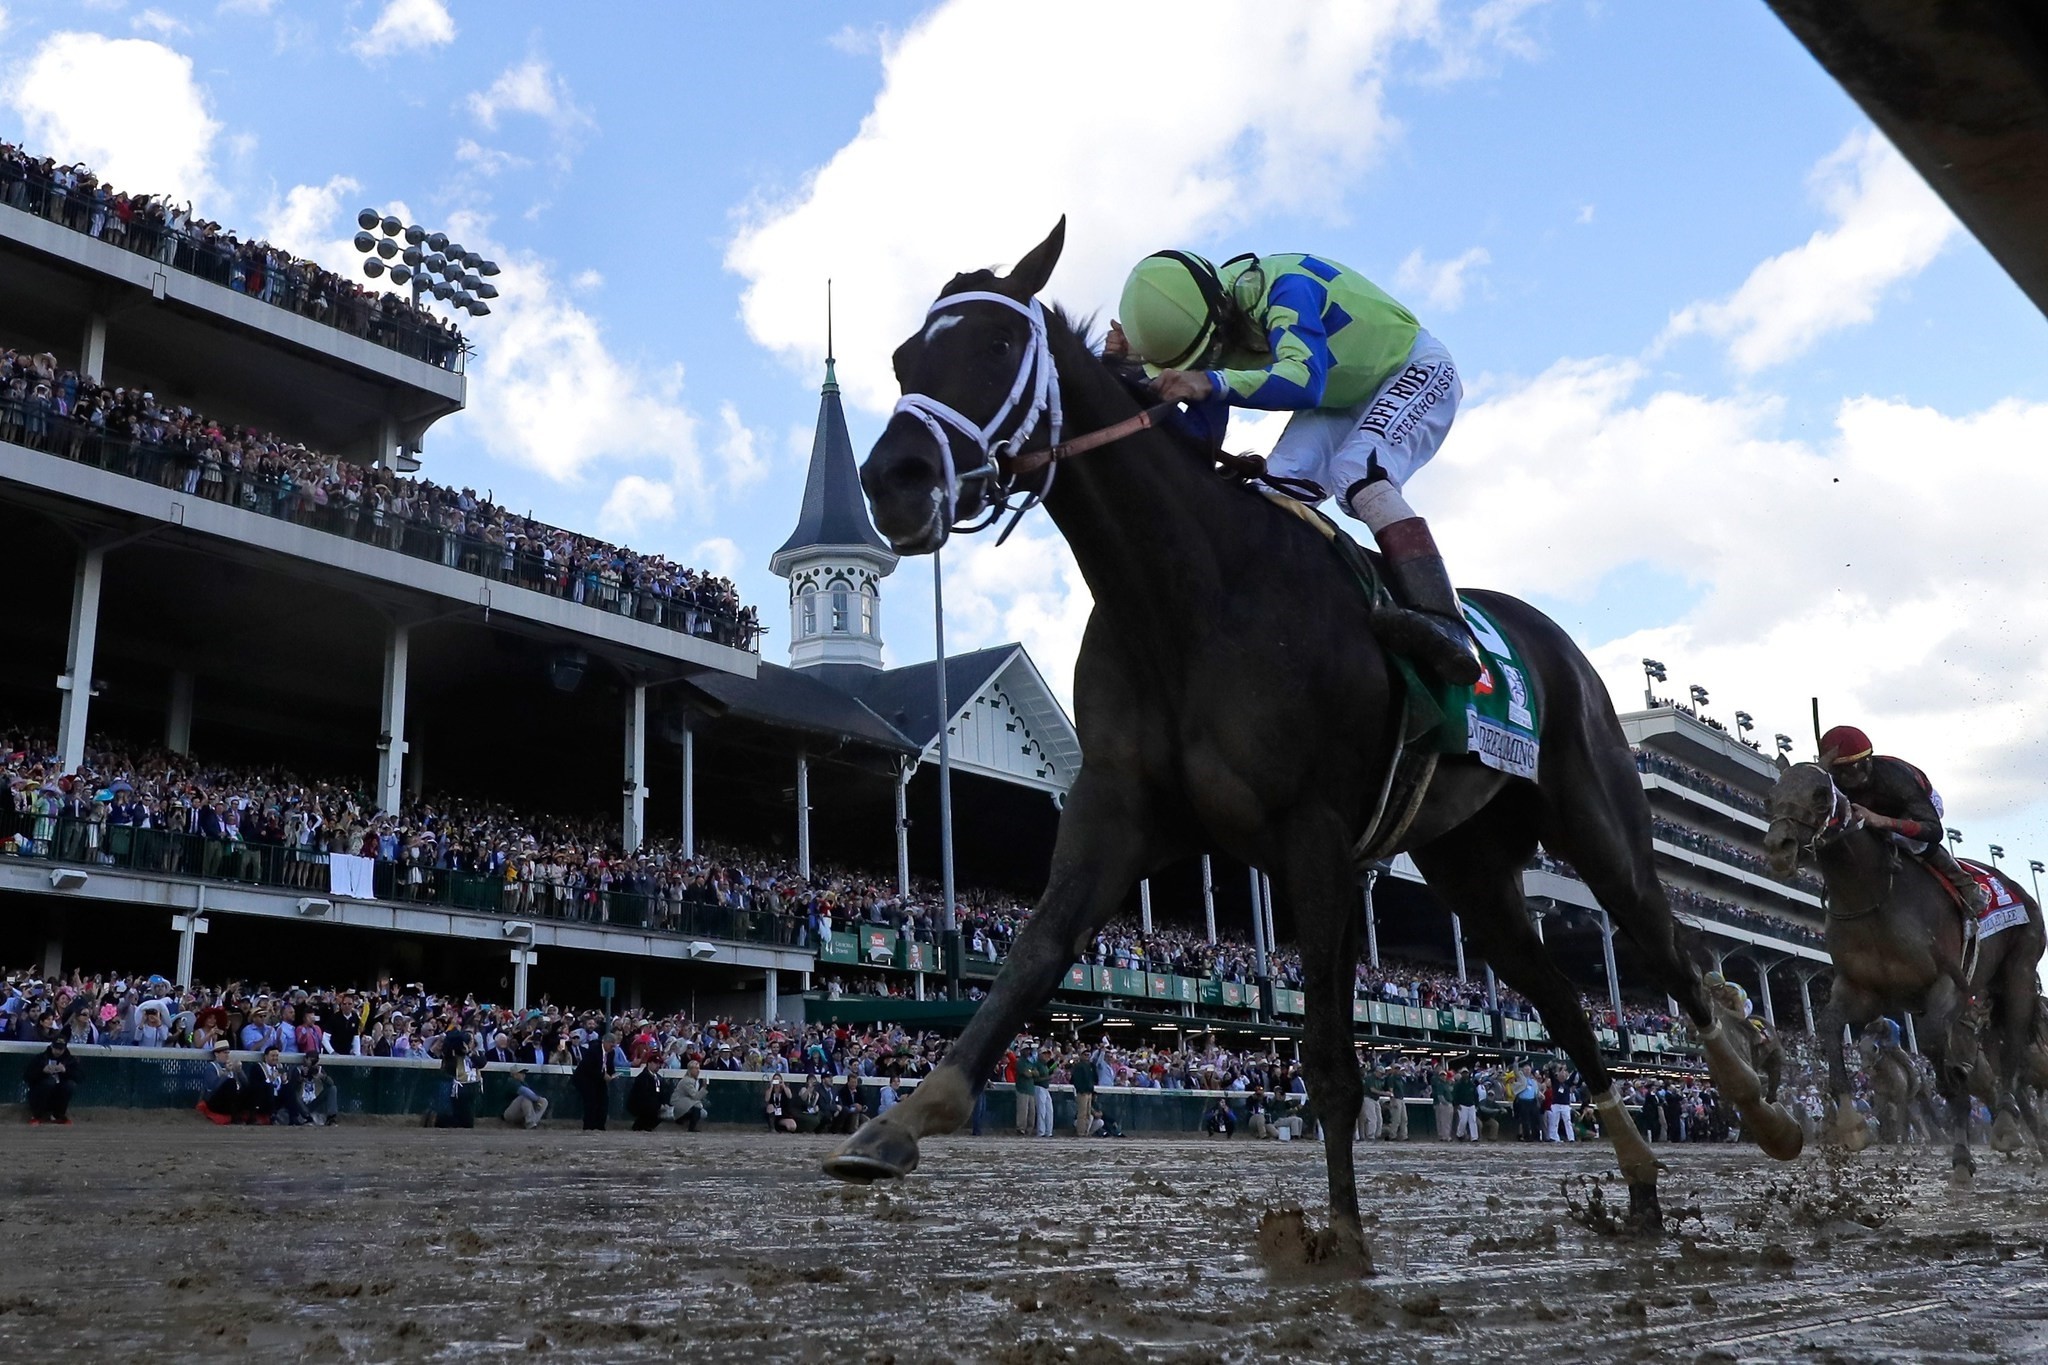 Jockey John Velazquez celebrates as he guides Always Dreaming #5 across the finish line to win the 143rd running of the Kentucky Derby.